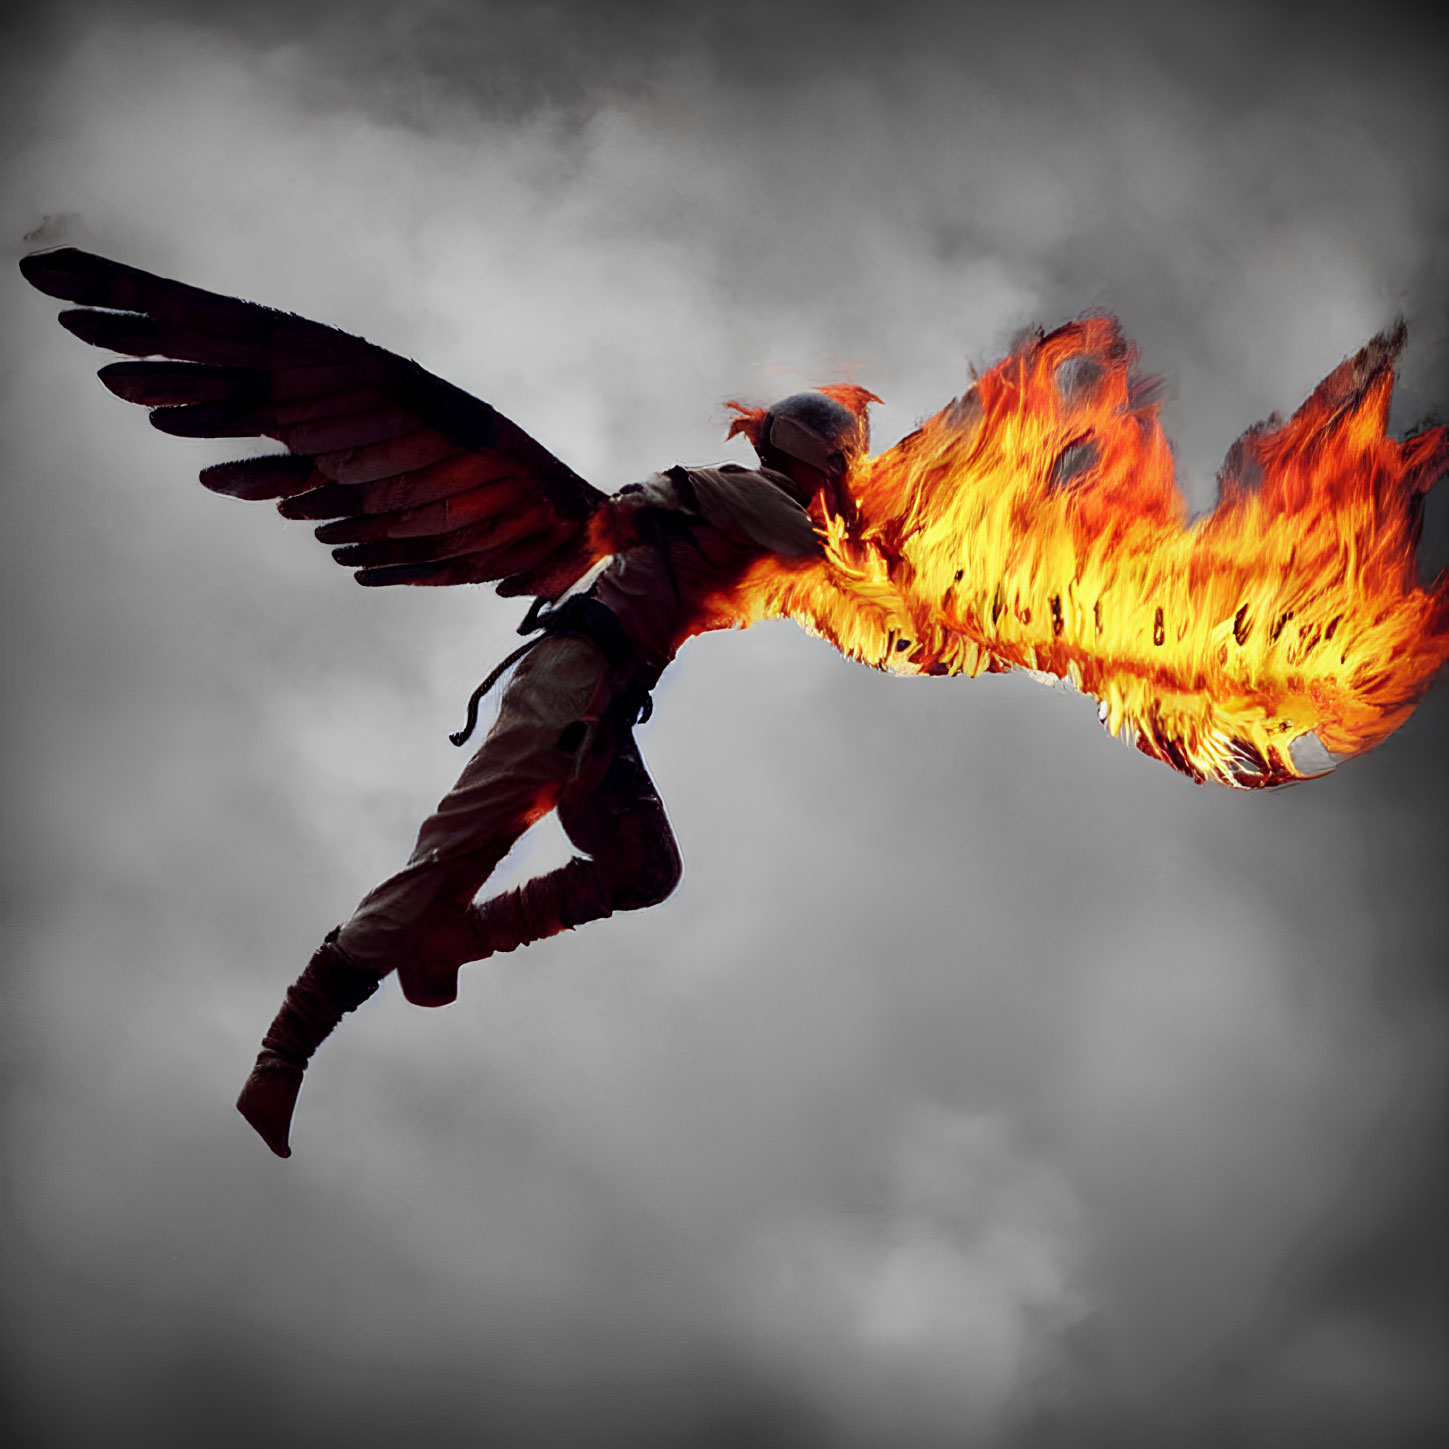 Mythological phoenix with wings and fiery tail against cloudy sky